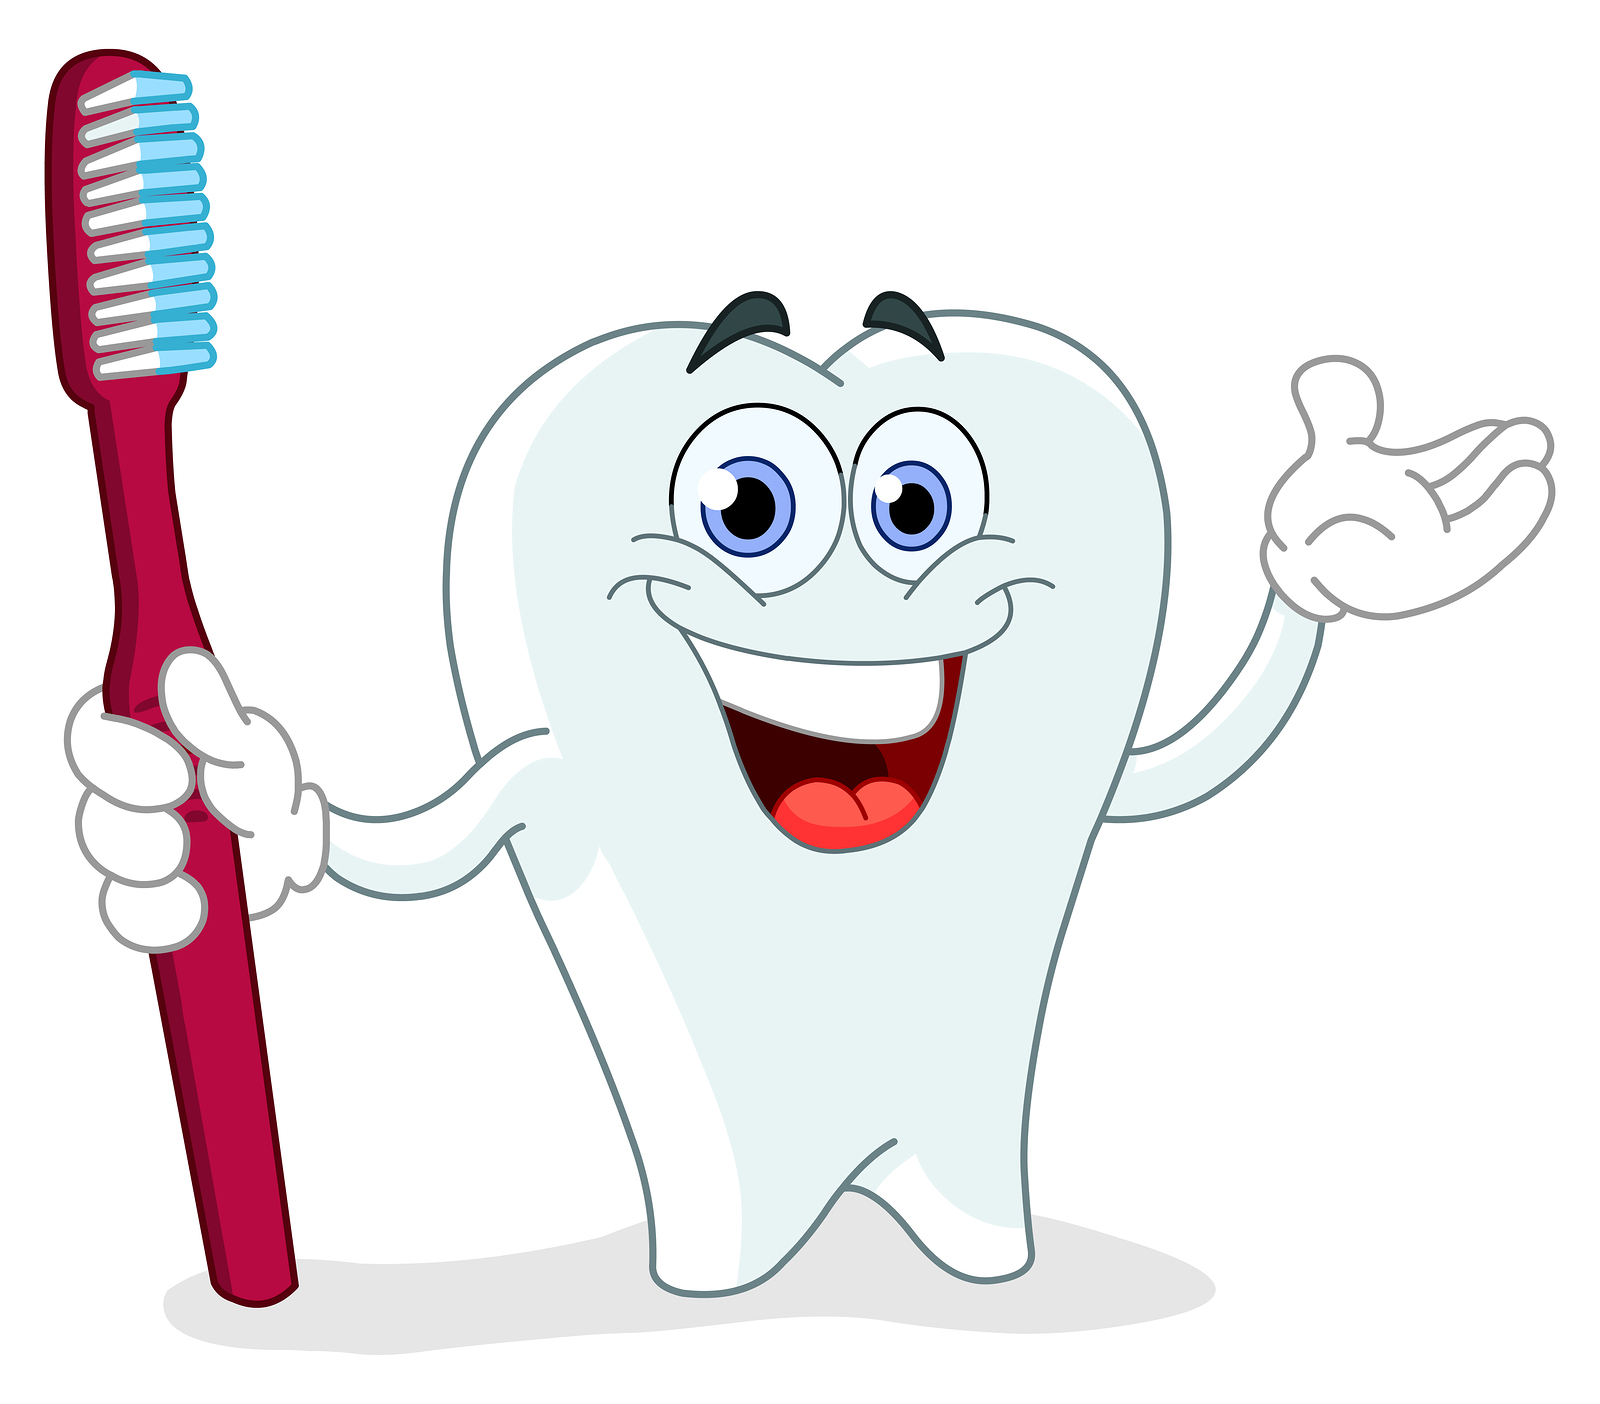 Bigstock Cartoon Tooth With Toothbrush About   Jobspapa Com